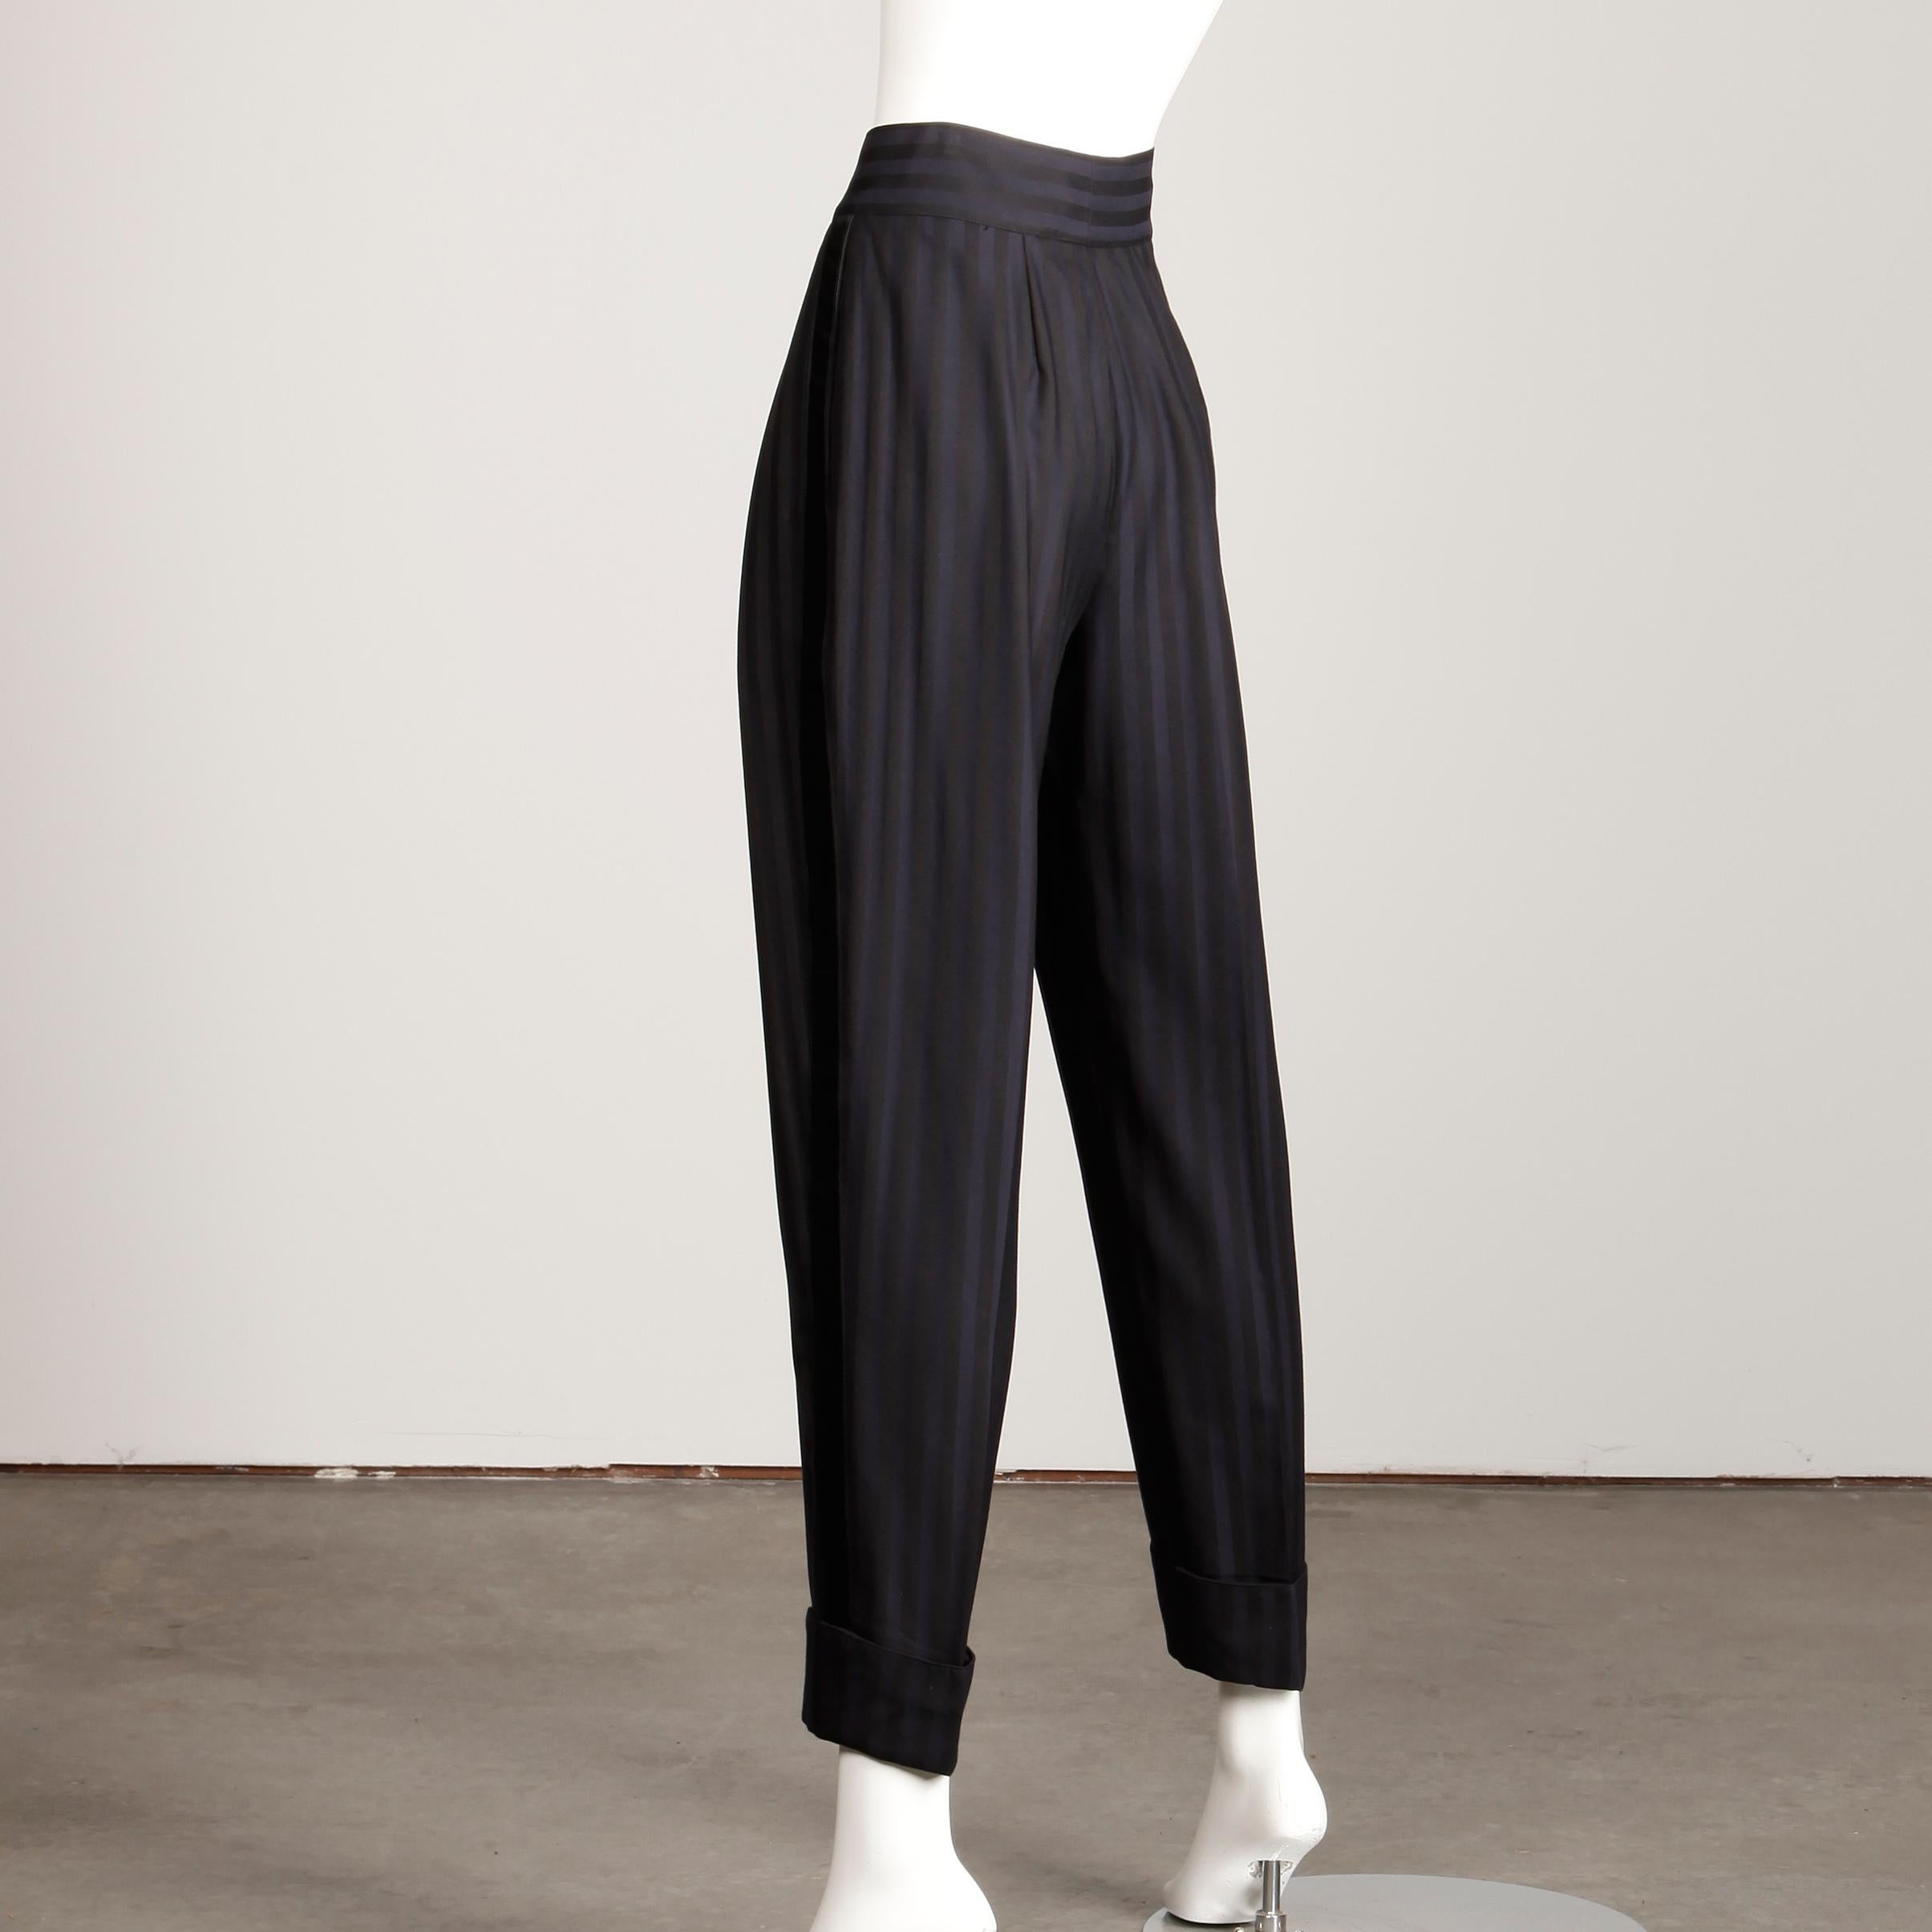 Claude Montana 1980s Vintage Navy Blue + Black Striped Wool Pants or Trousers 1